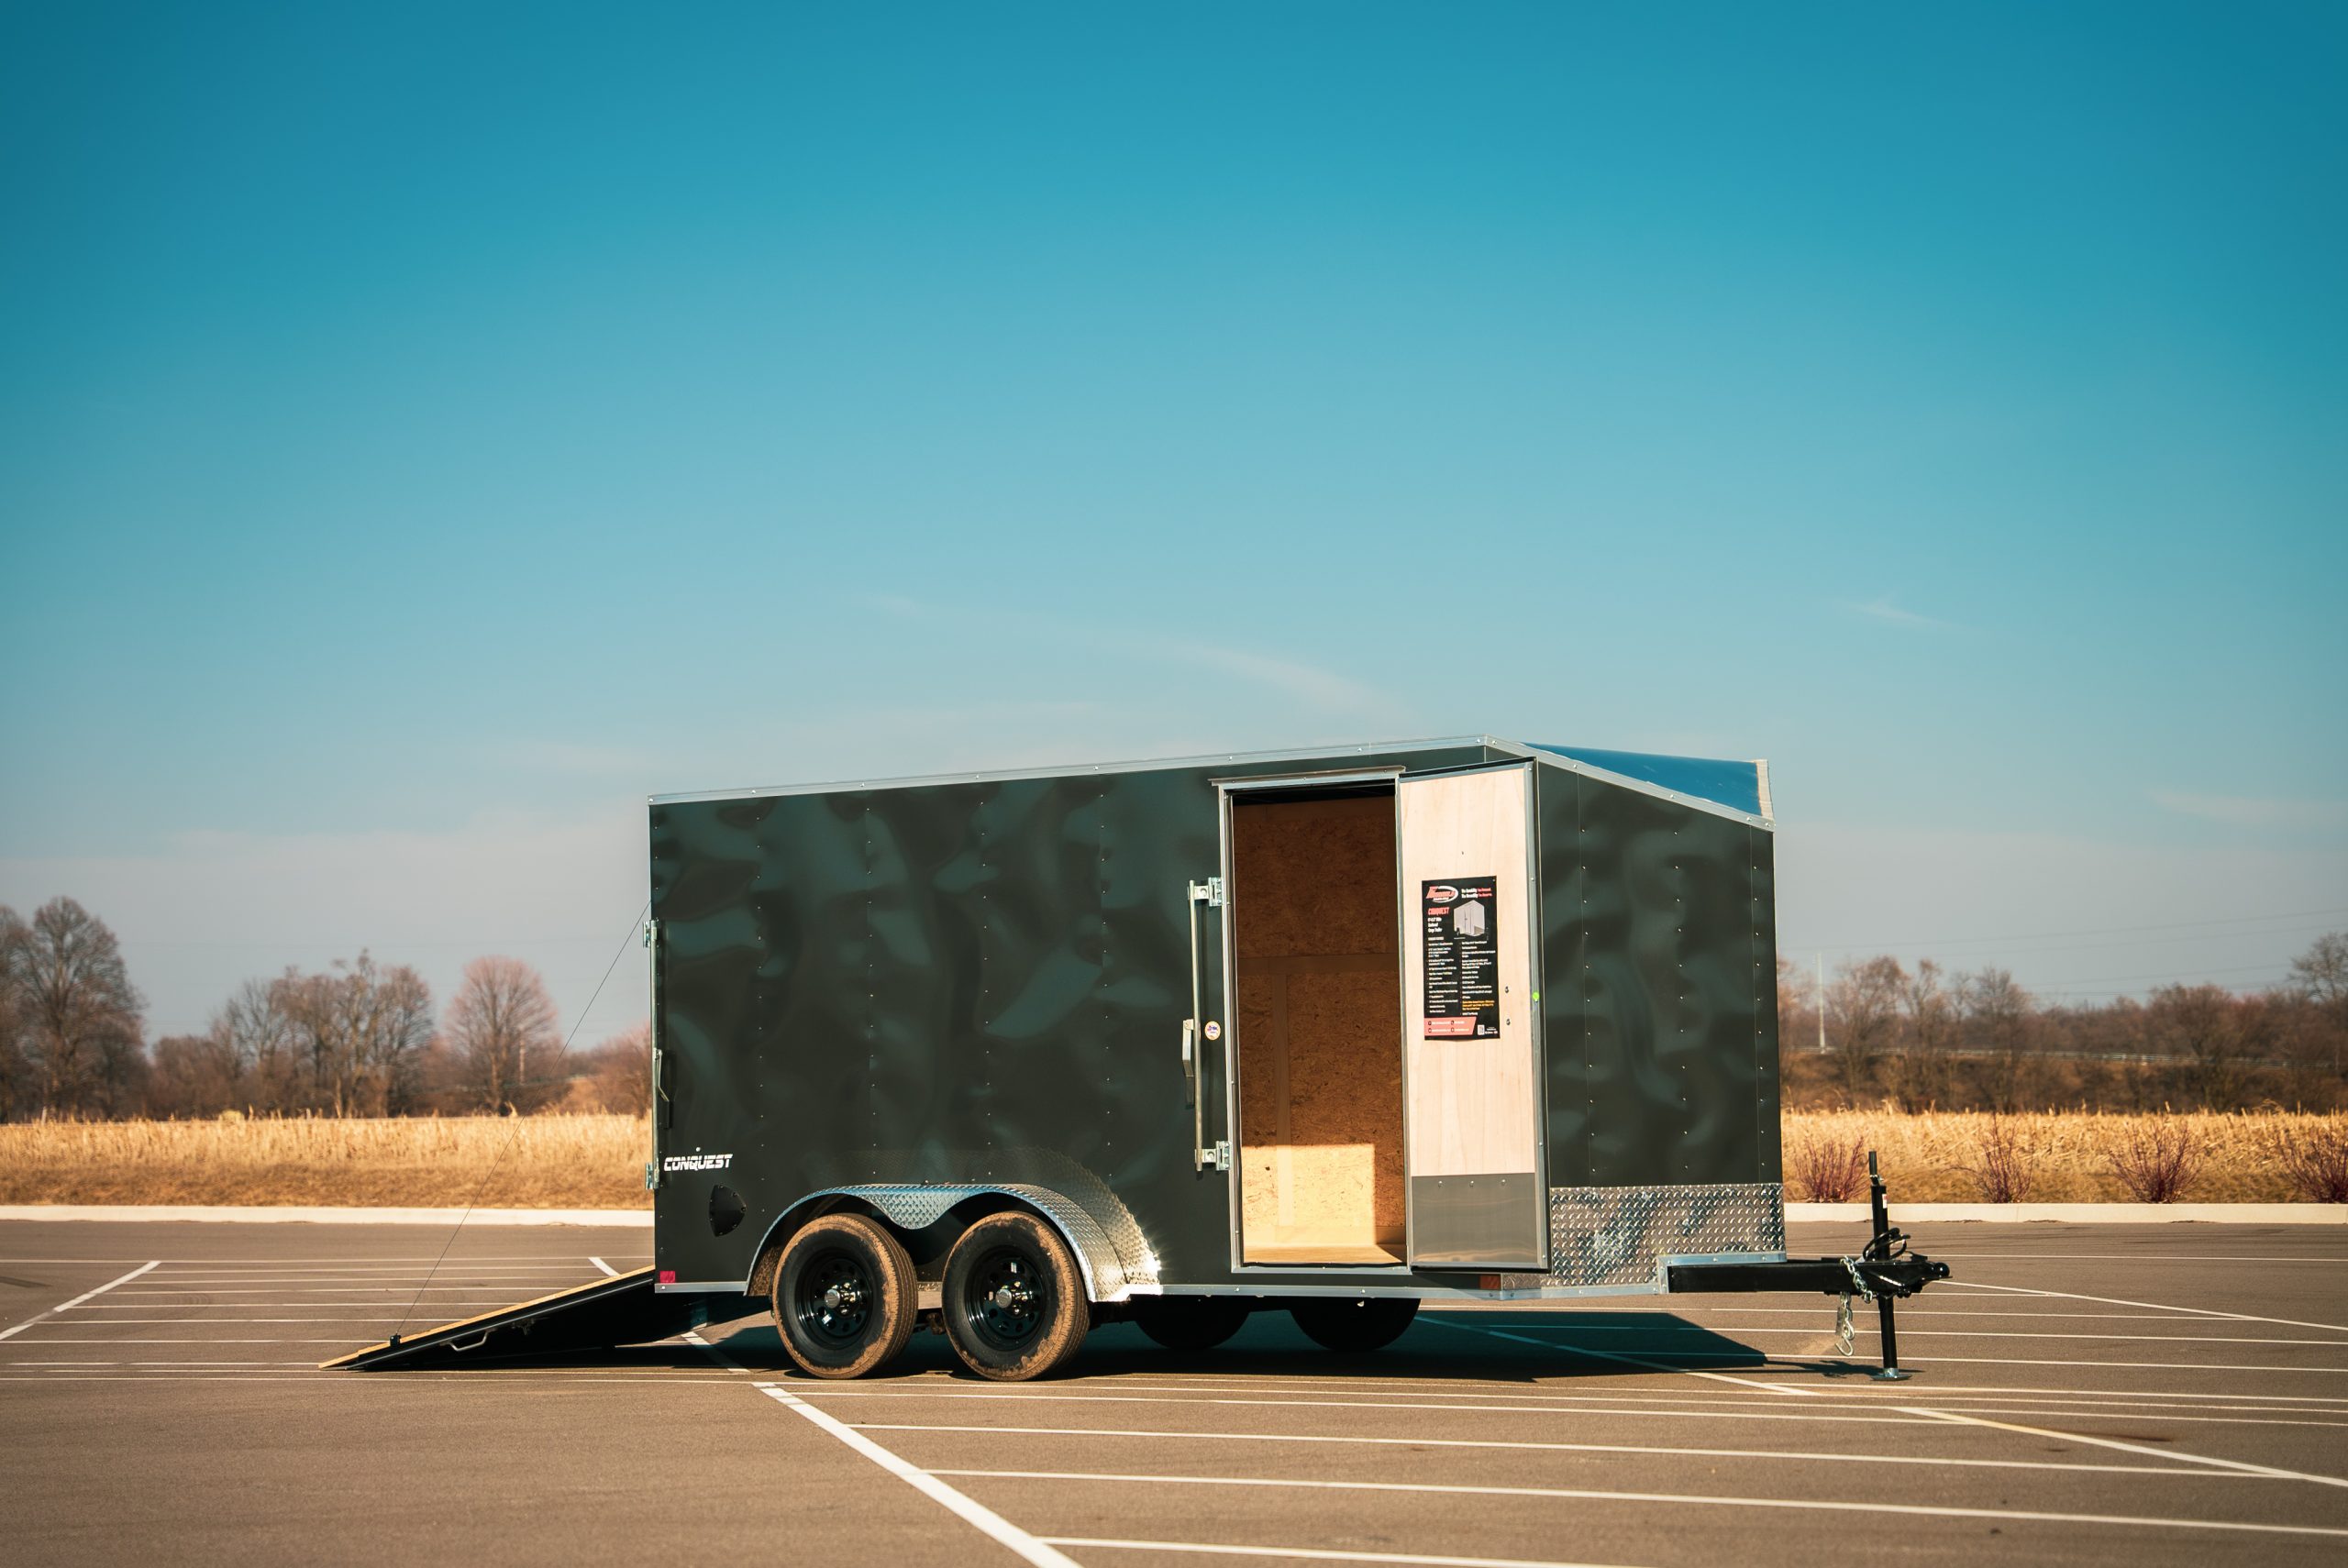 How to: Improve Business with Formula's Enclosed Cargo Trailers